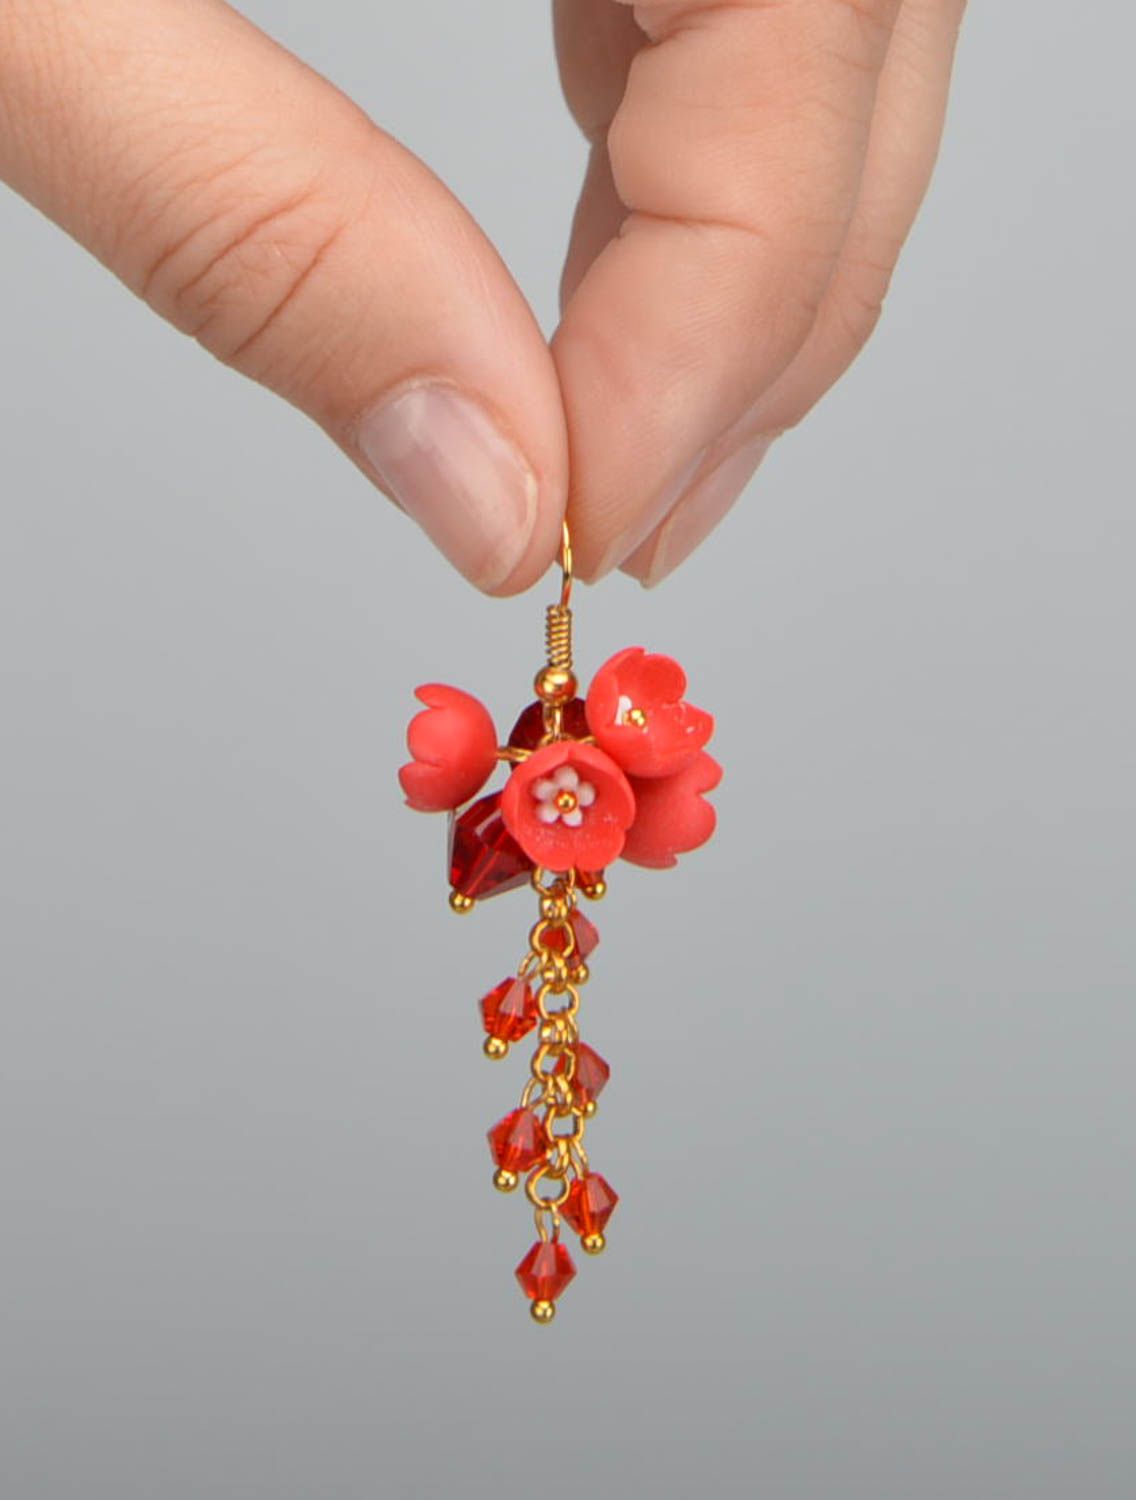 Stylish homemade plastic flower earrings polymer clay ideas jewelry designs photo 5